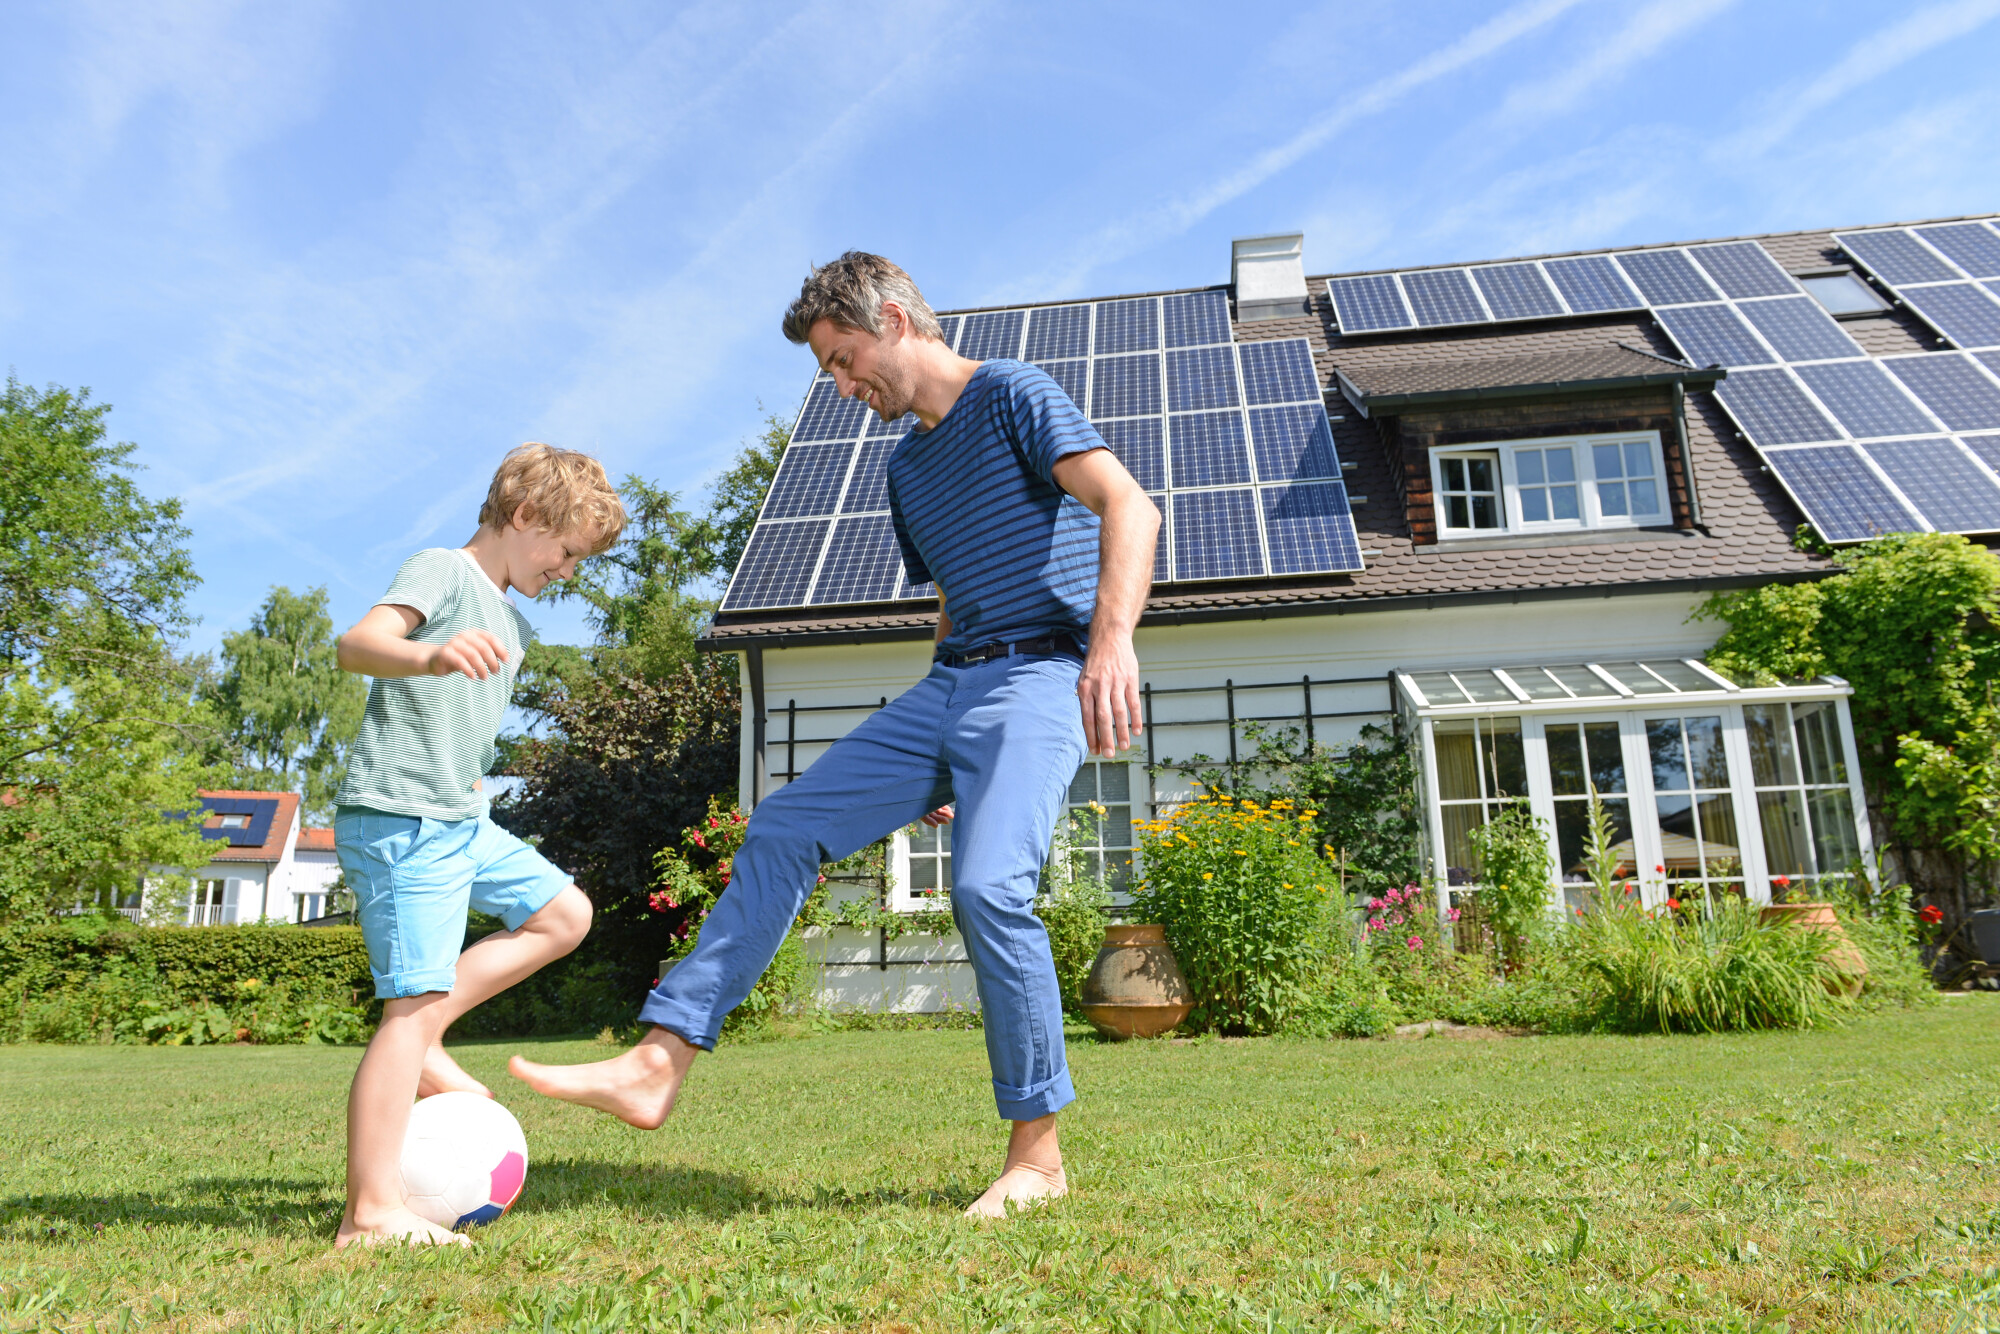 19 Ways To Save Energy and Money for Homeowners